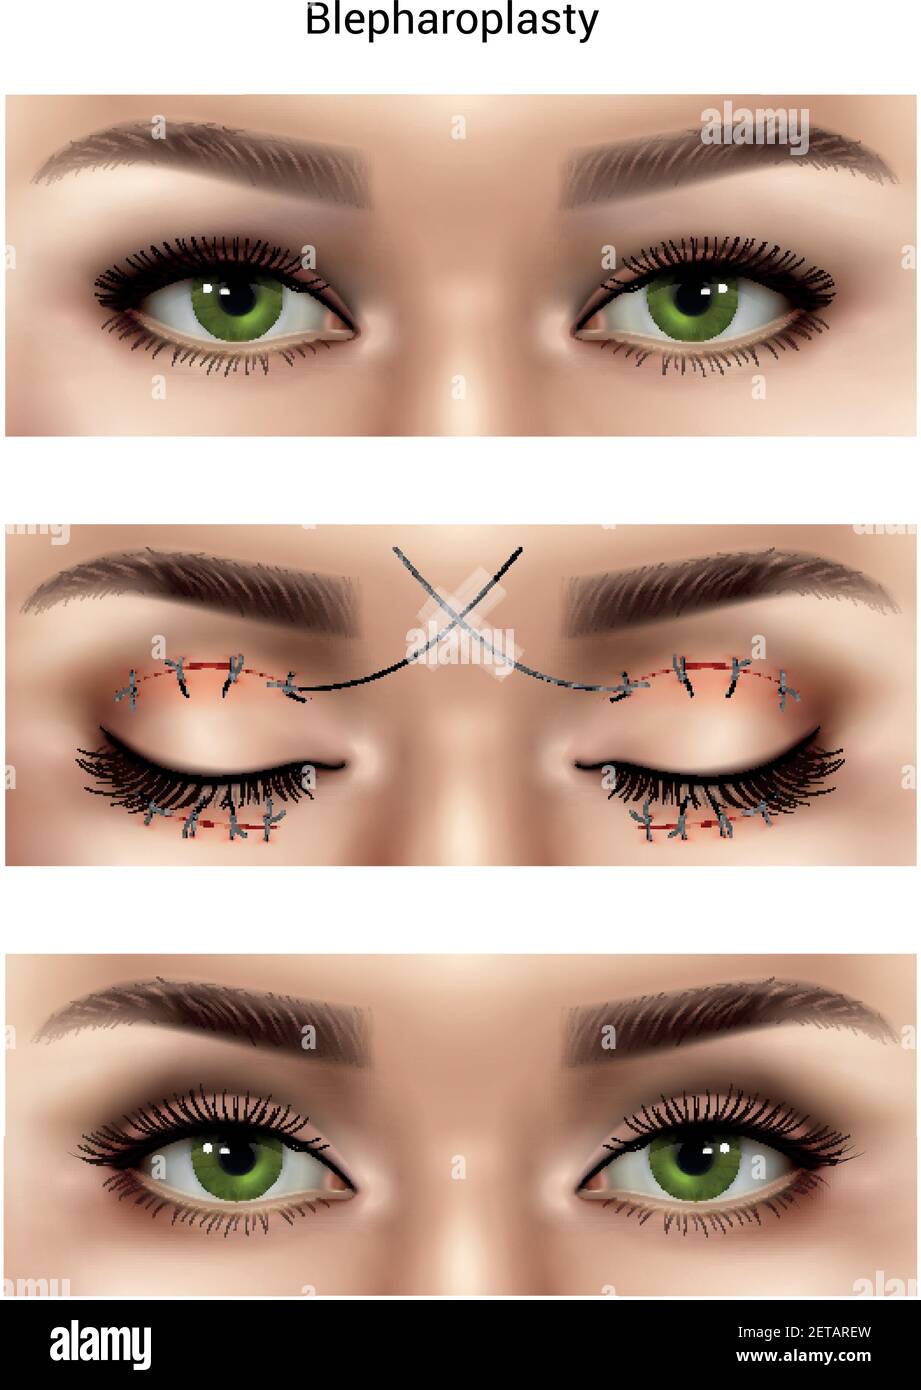 Surgical suture stitches realistic composition with images of female eyes at different stages of blepharoplasty procedures vector illustration Stock Vector